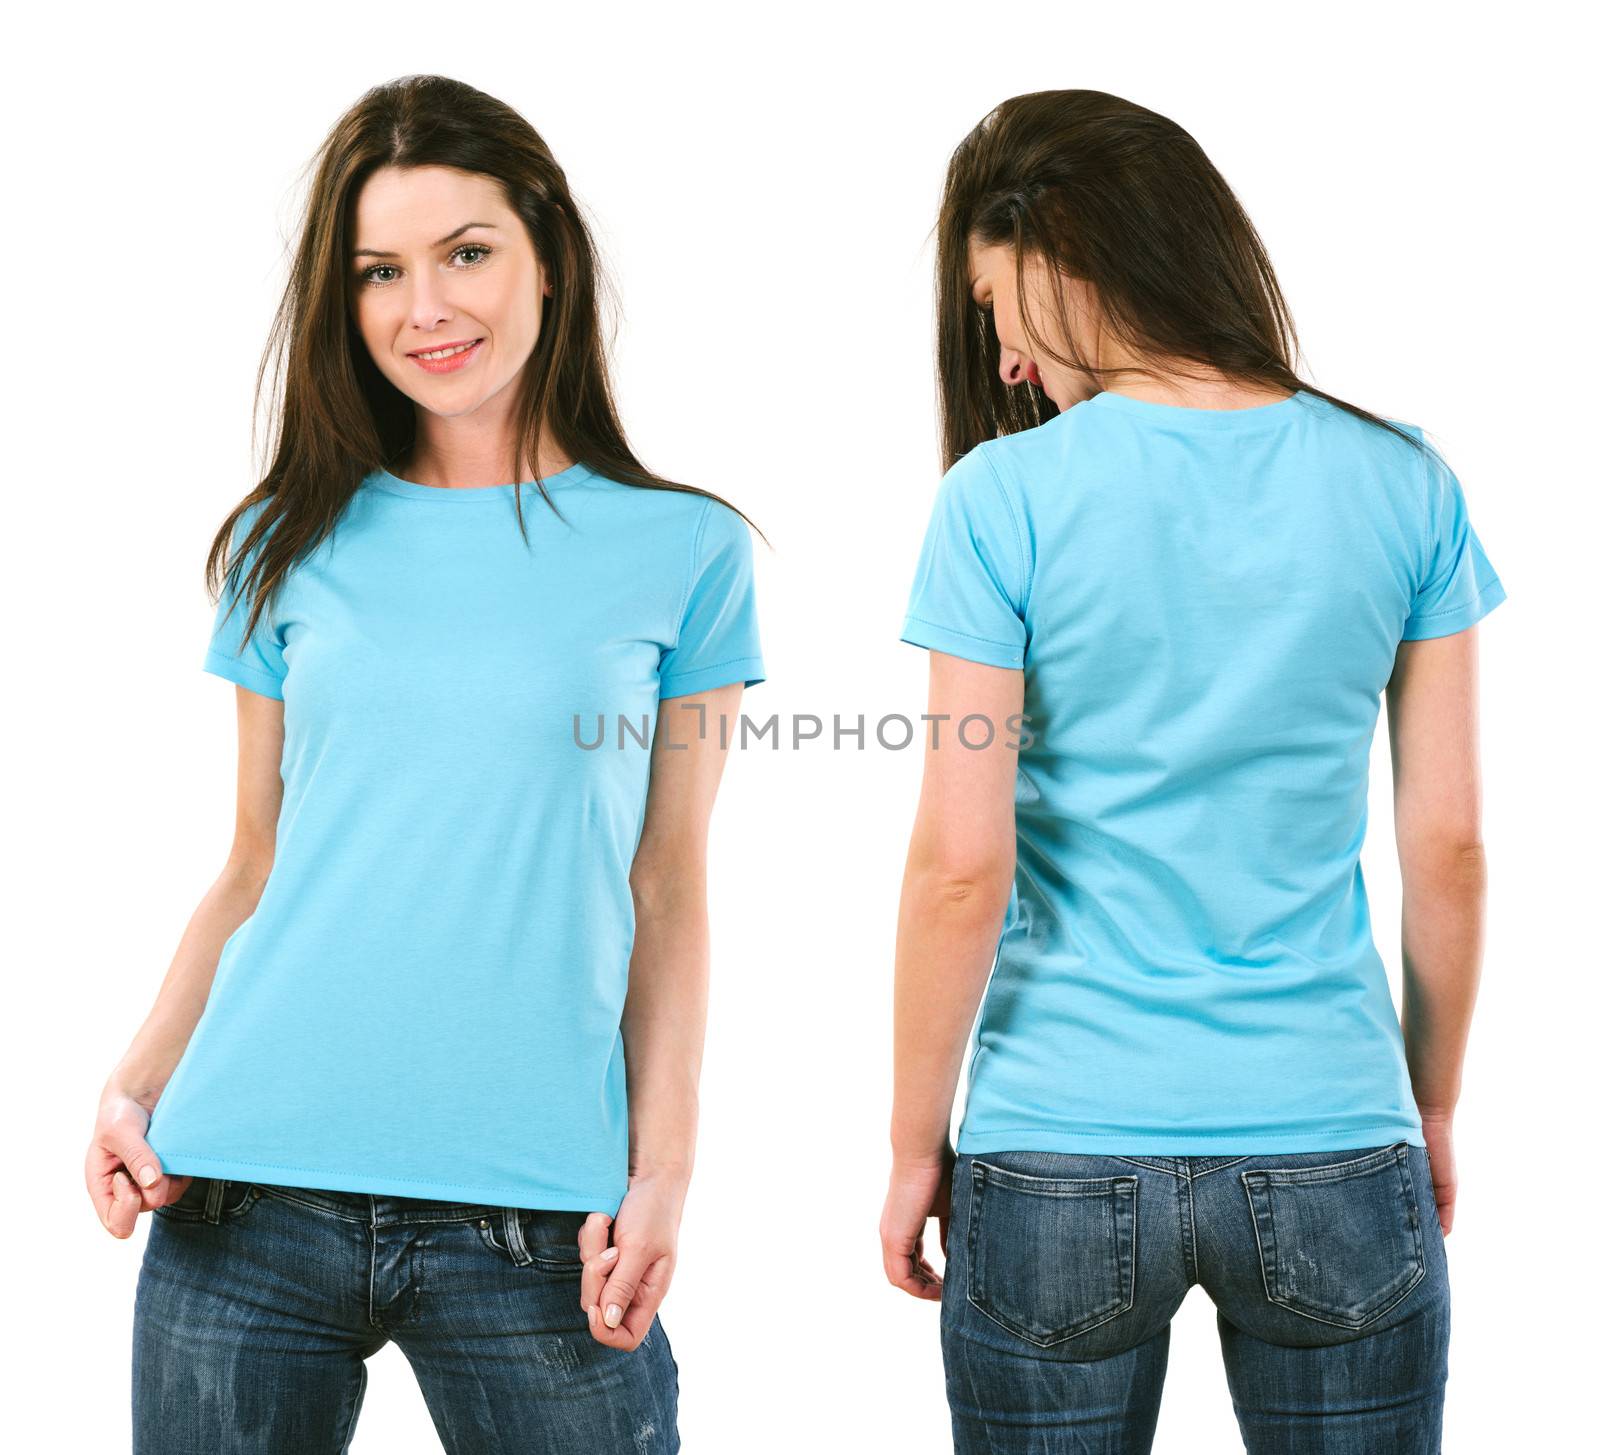 Photo of a beautiful brunette woman with blank light blue shirt. Ready for your design or artwork.